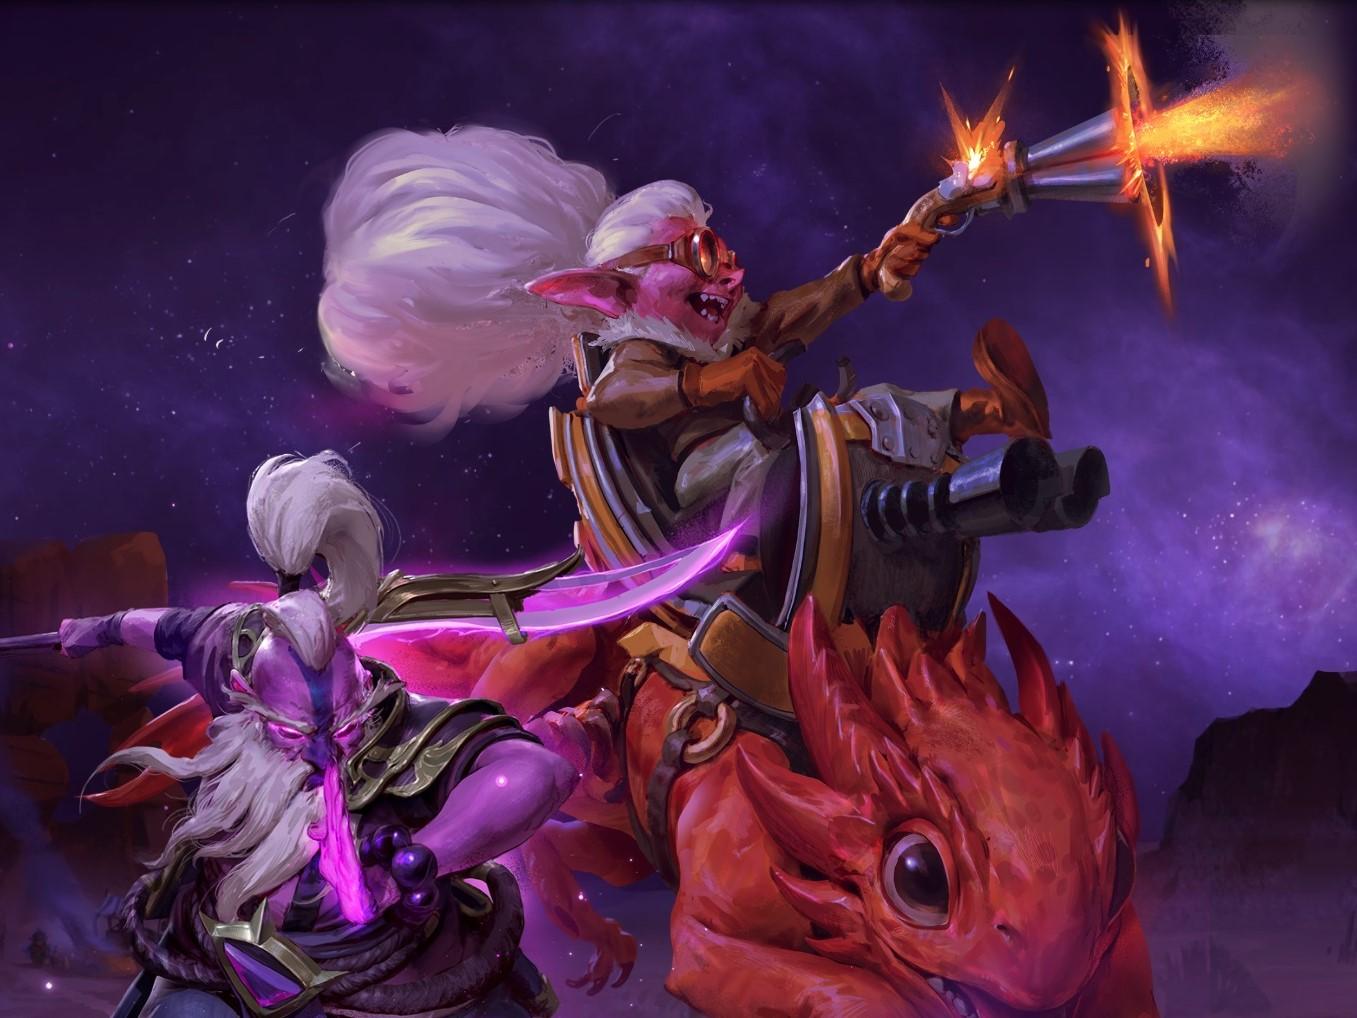 The Outlanders update for Dota 2 brings major changes to the game